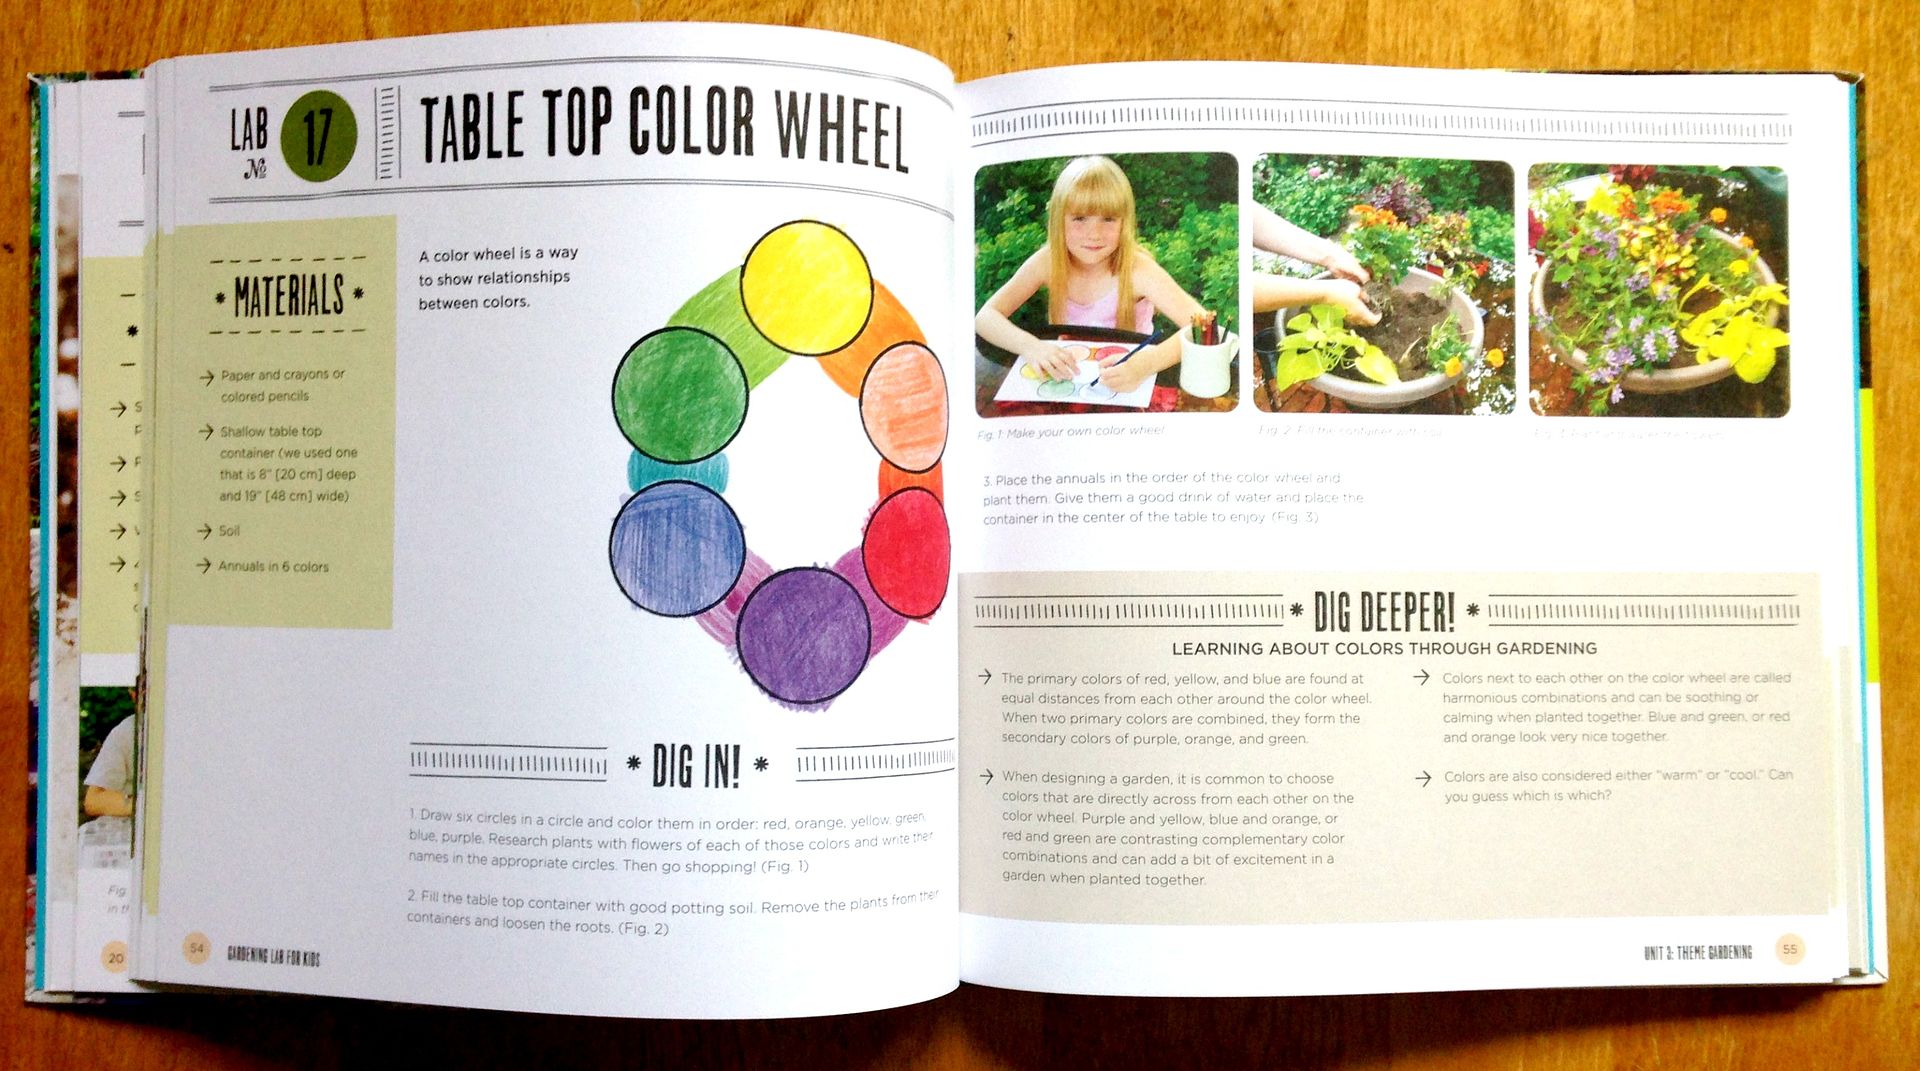 Gardening Lab for Kids book: How to make a color wheel